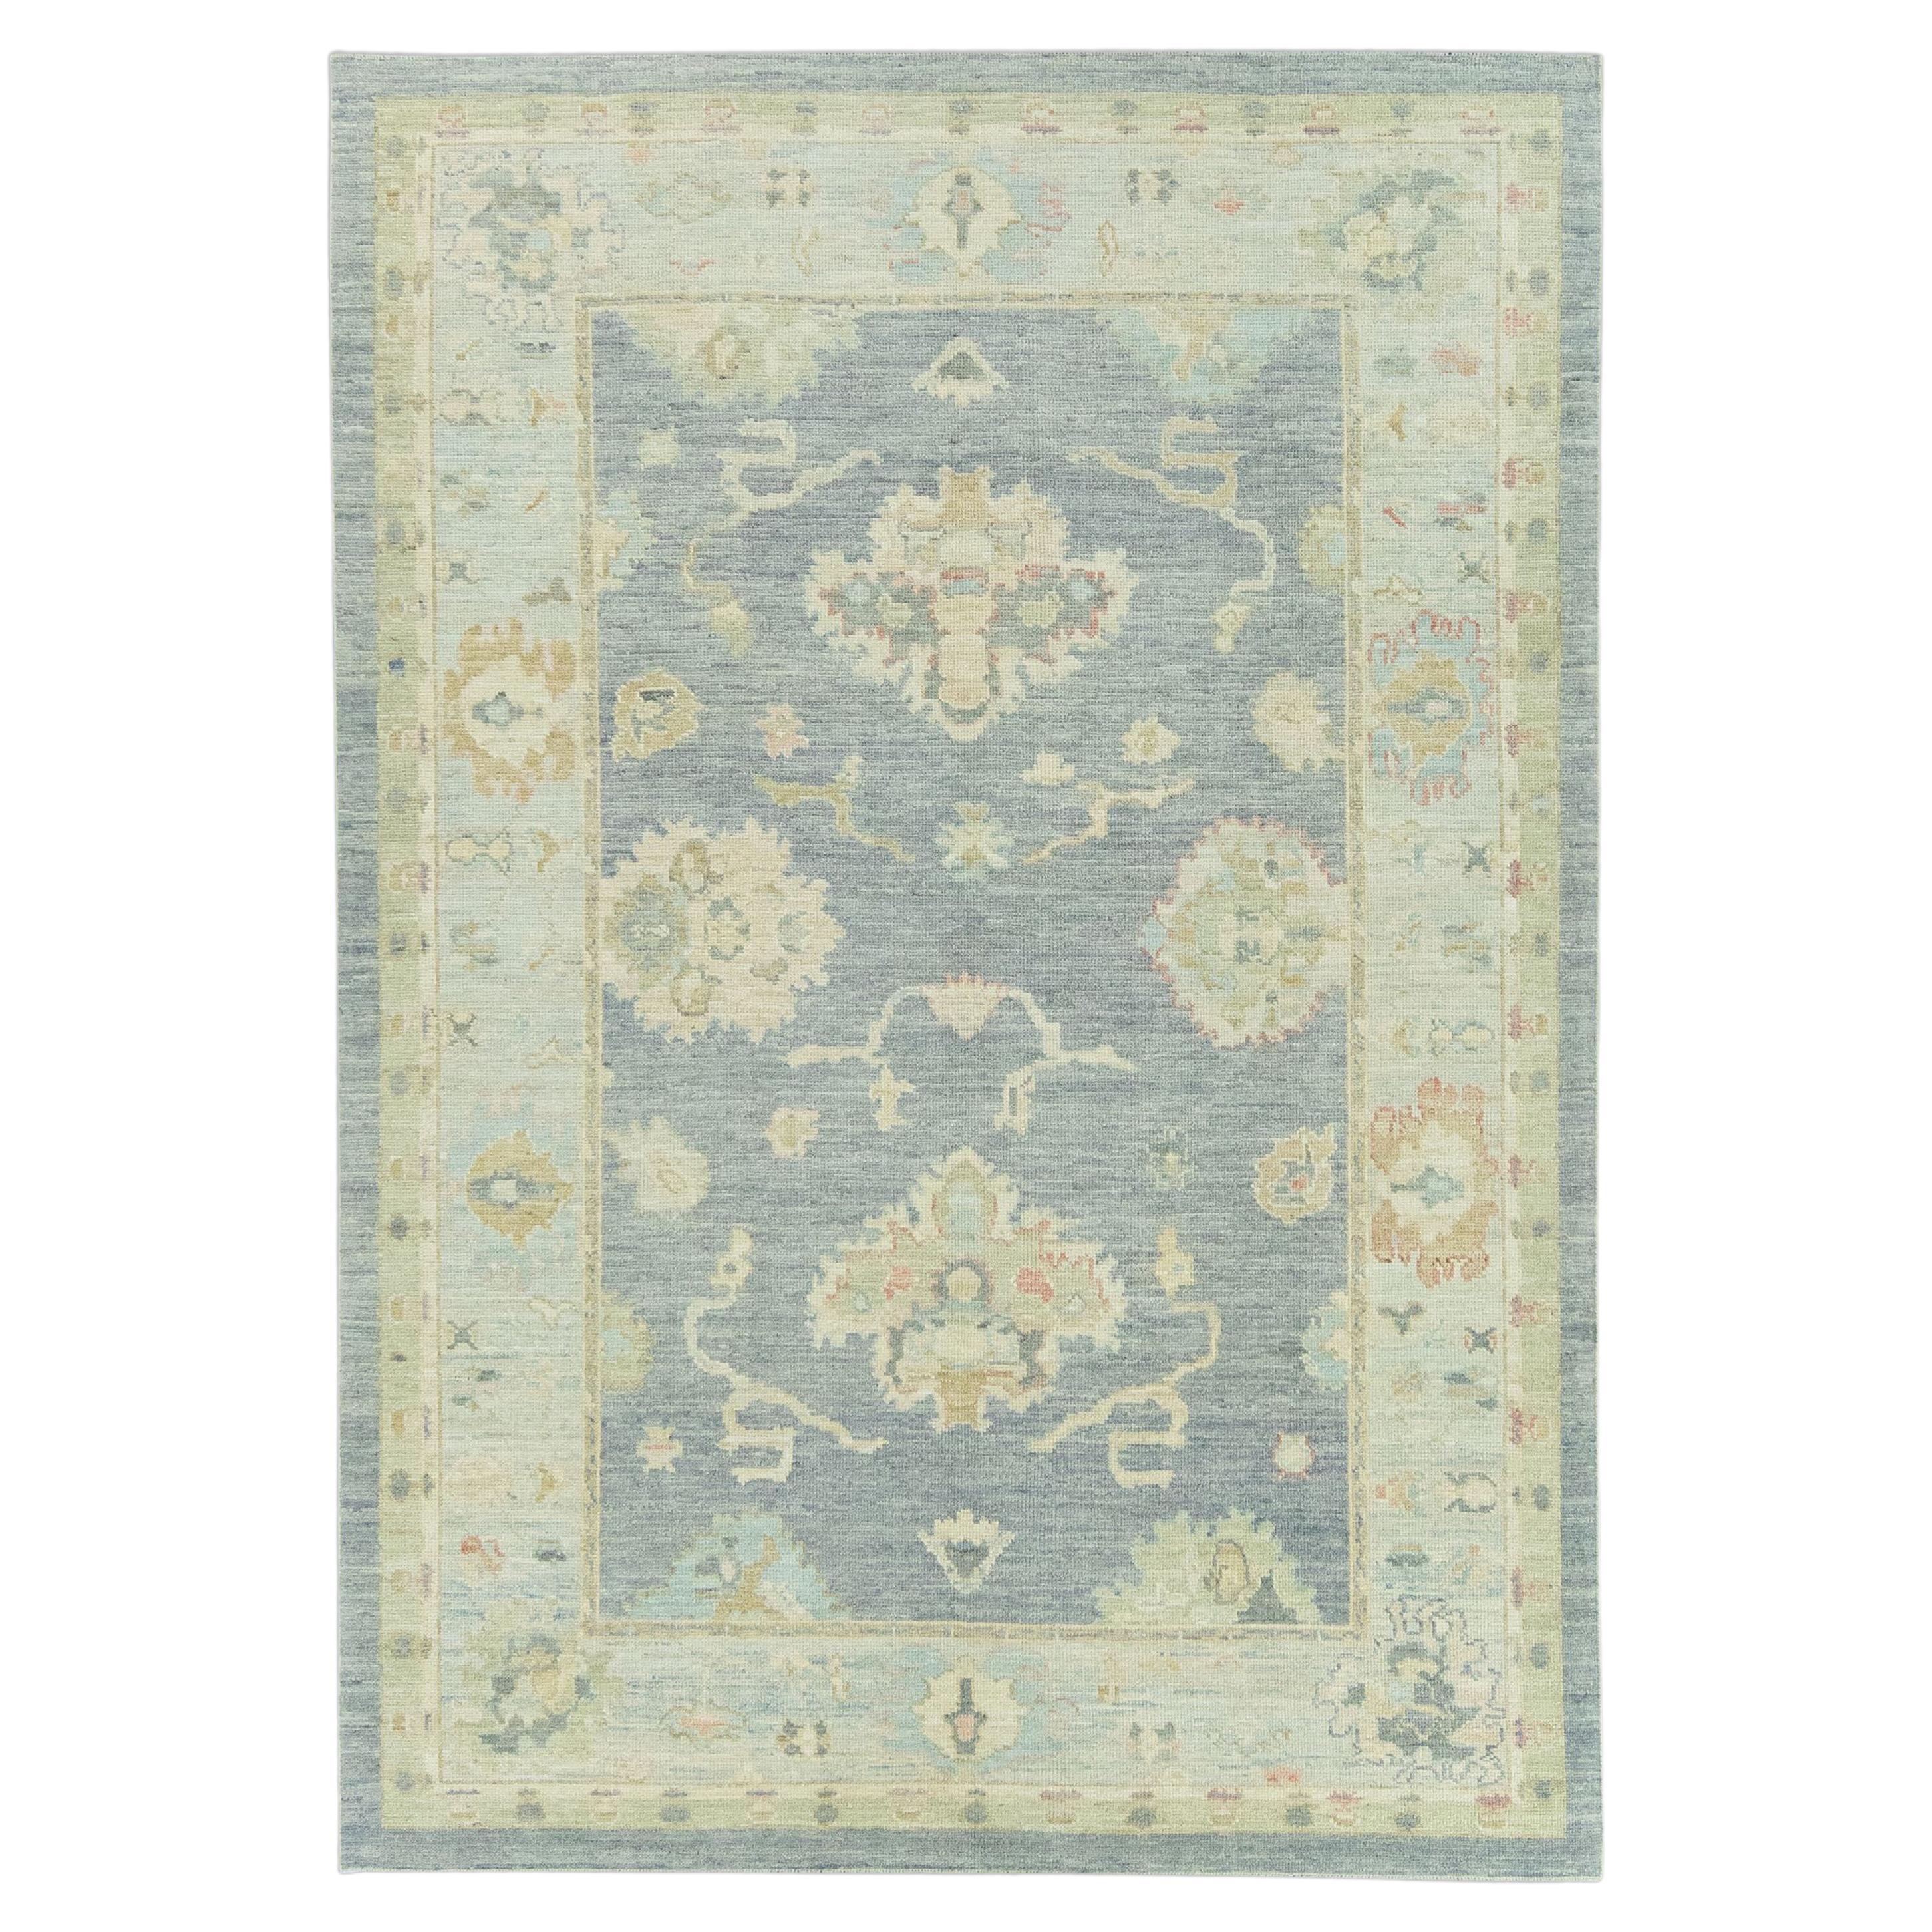 Hand Knotted Oriental Wool Turkish Oushak Rug 7'1" x 10" #15033 For Sale